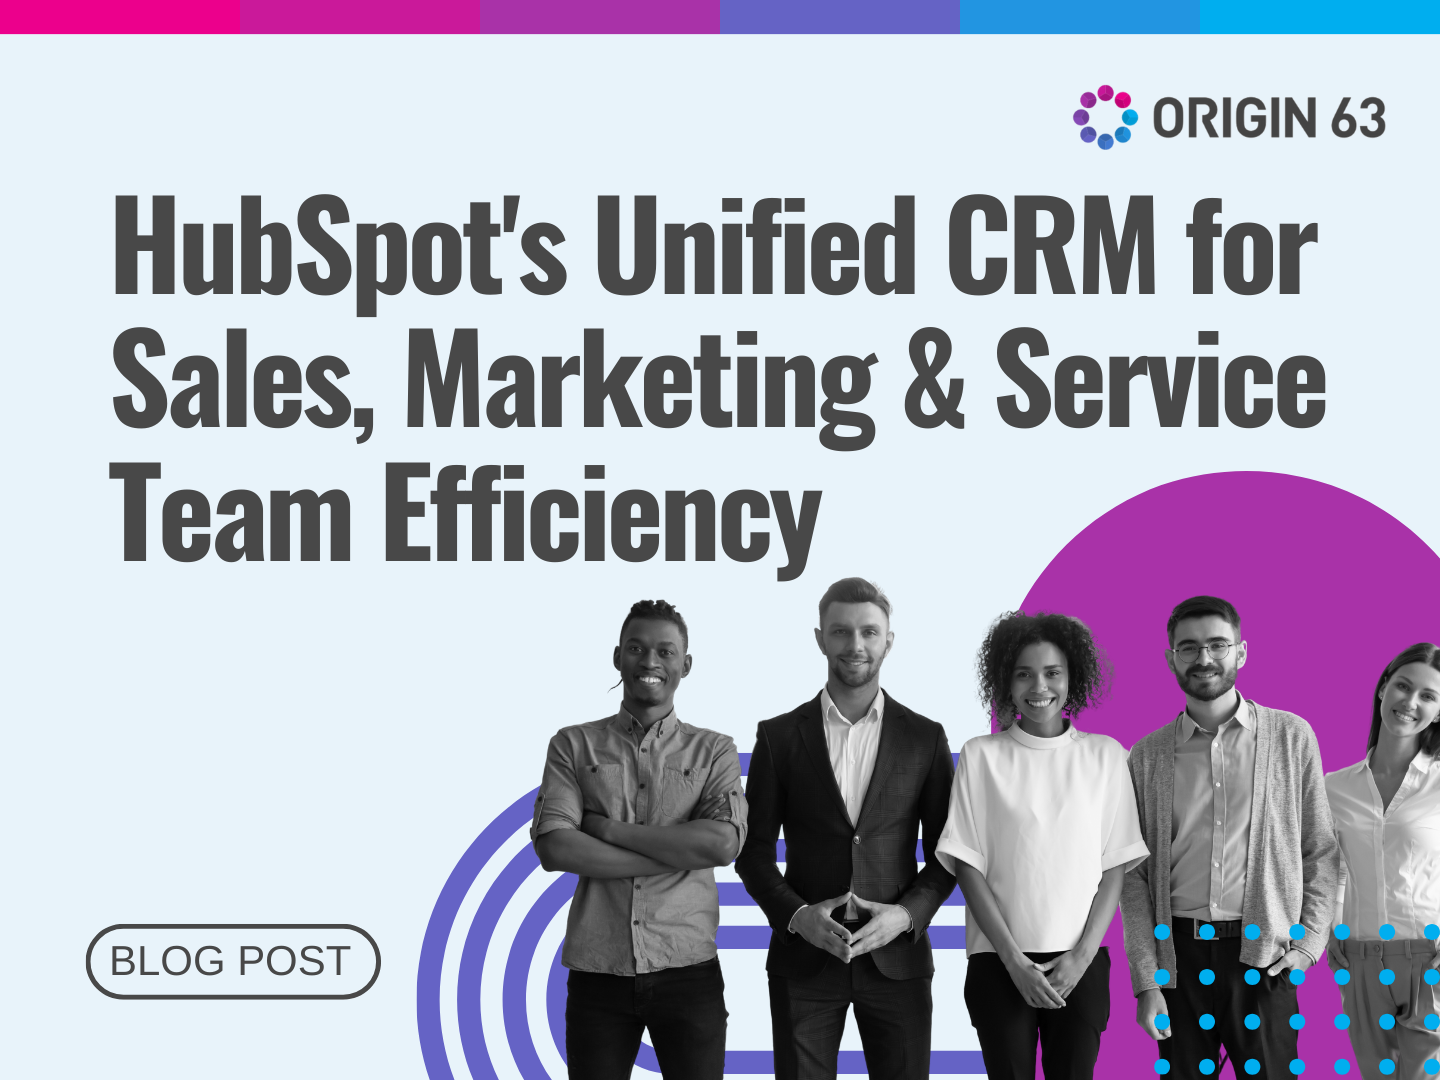 Discover how HubSpot's unified CRM allows marketing, sales & service teams to delight customers through seamless collaboration.